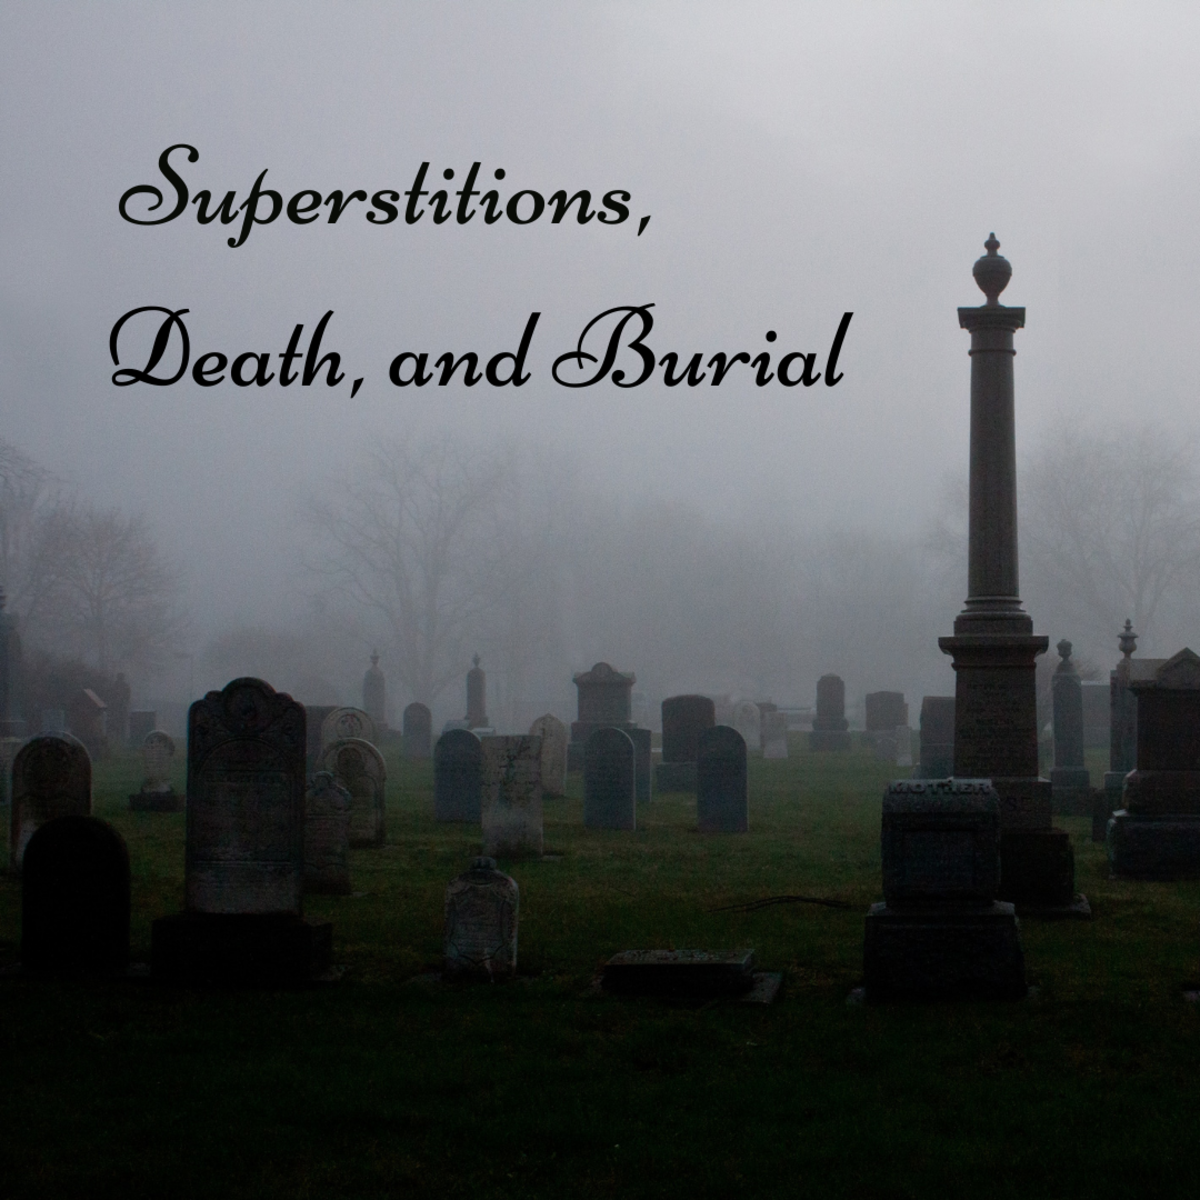 Cemeteries are the focus of many superstitions.